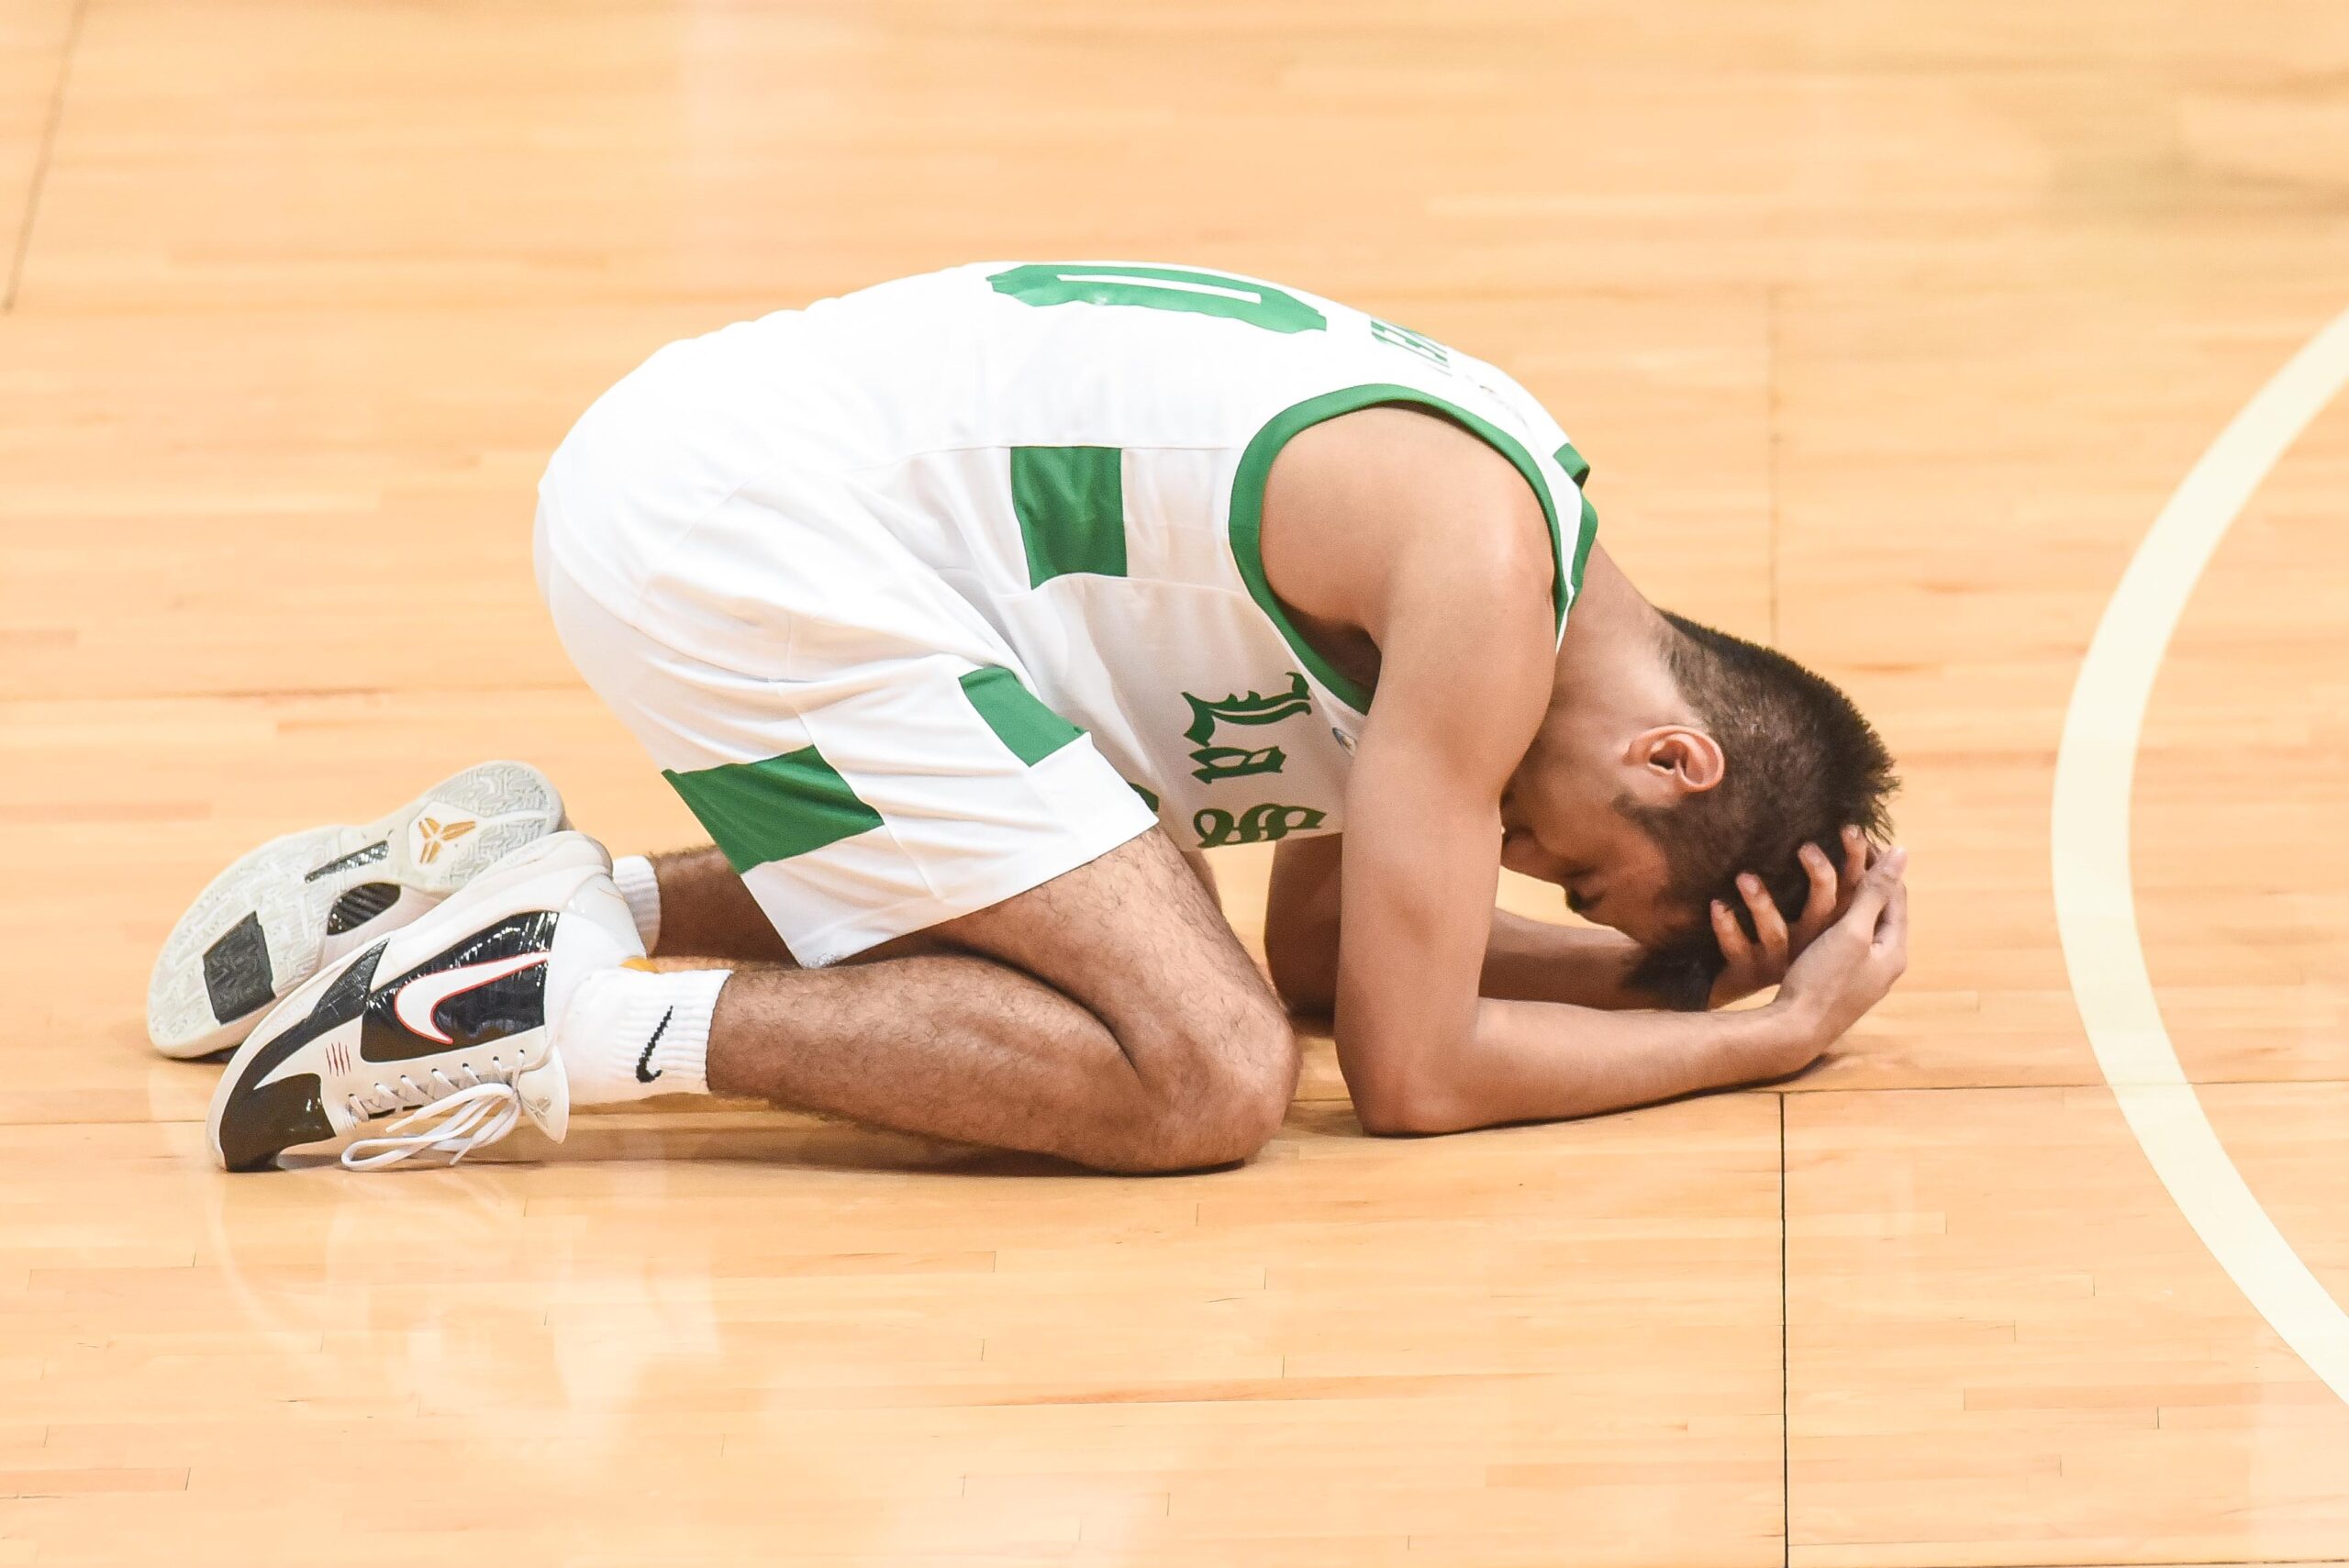 UAAP-84-Mens-Basketball-DLSU-vs-UP-Evan-Nelle-2-scaled Evan Nelle can finally cry tears of joy Basketball DLSU News UAAP  - philippine sports news